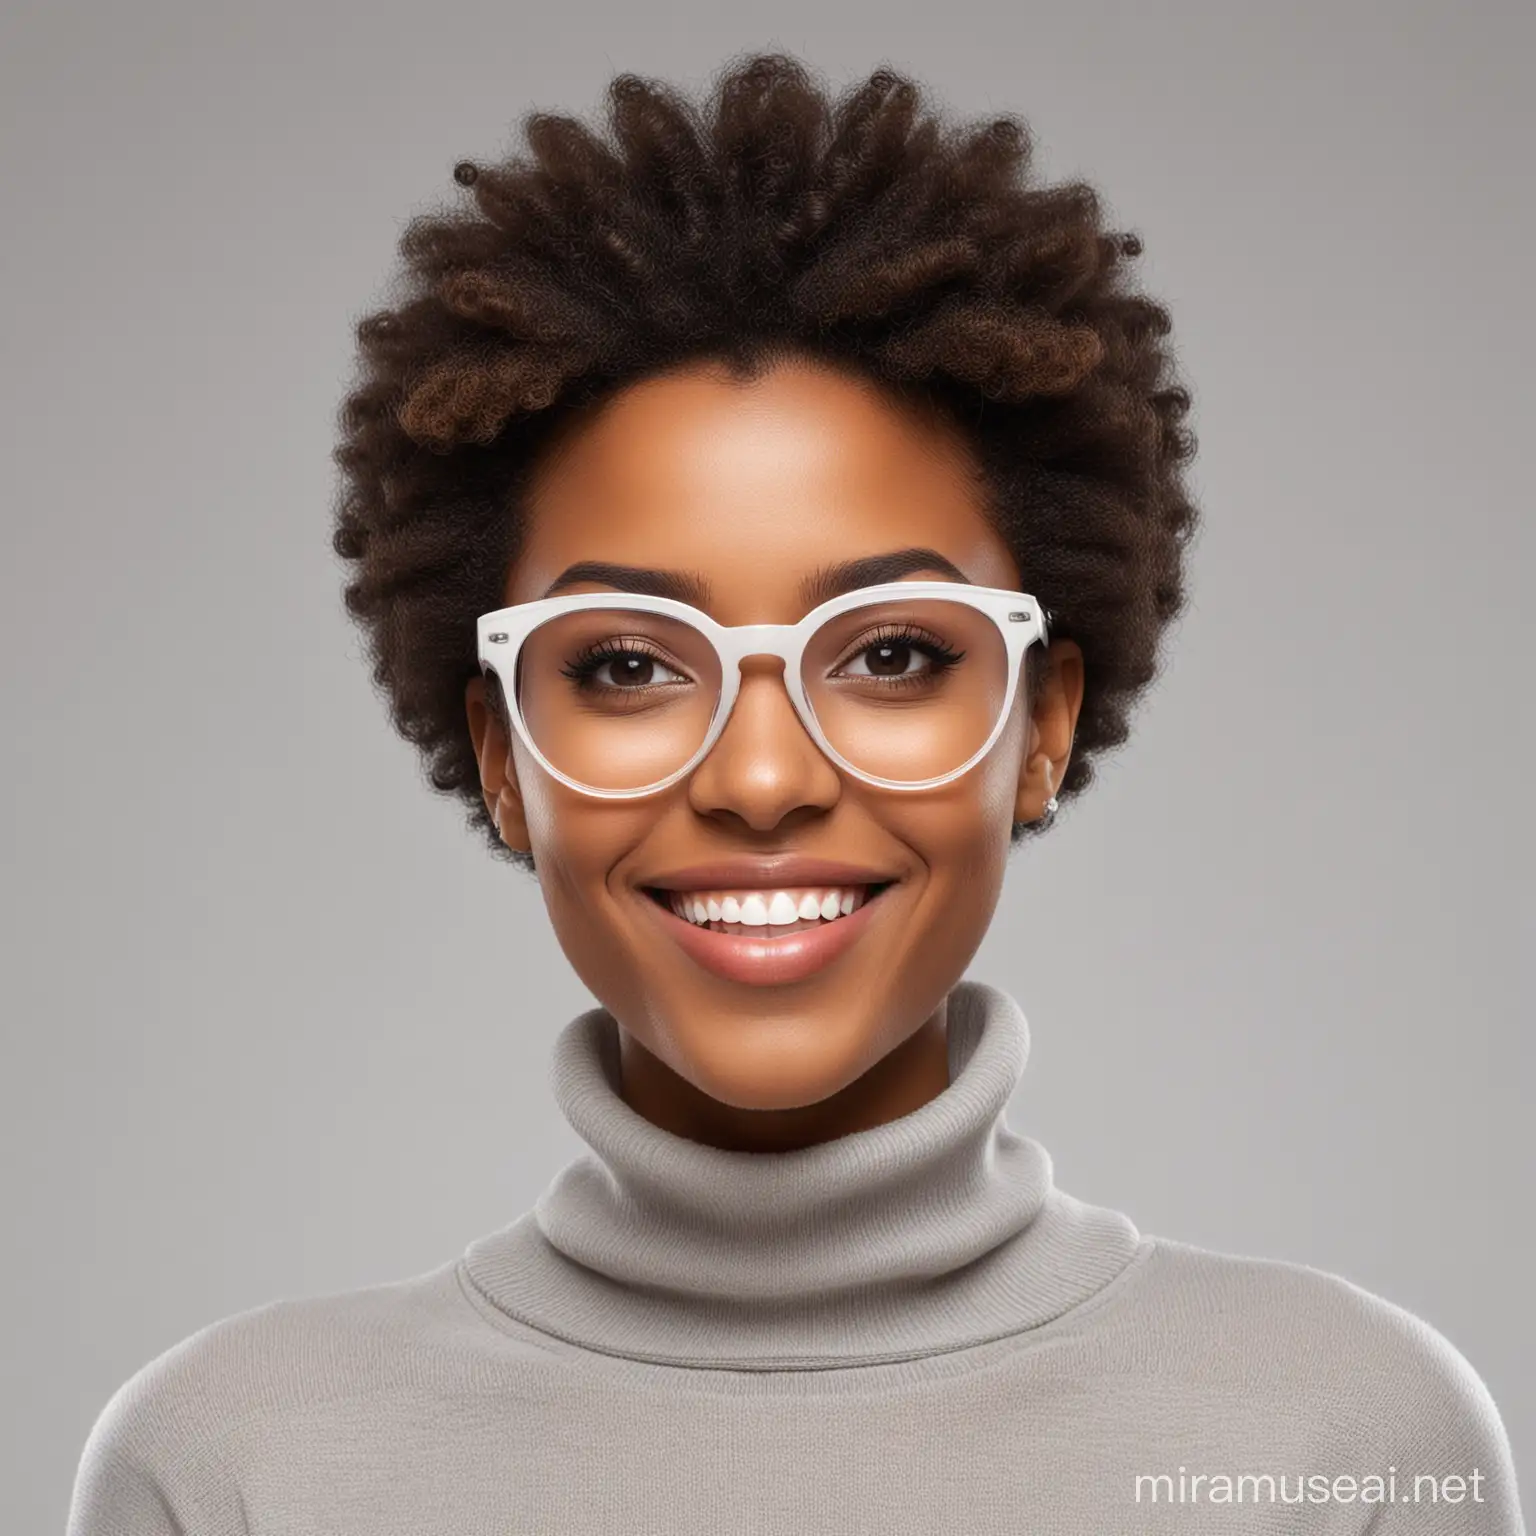 Portrait of a Stylish Young African Woman with Short Afro Hair and Glasses